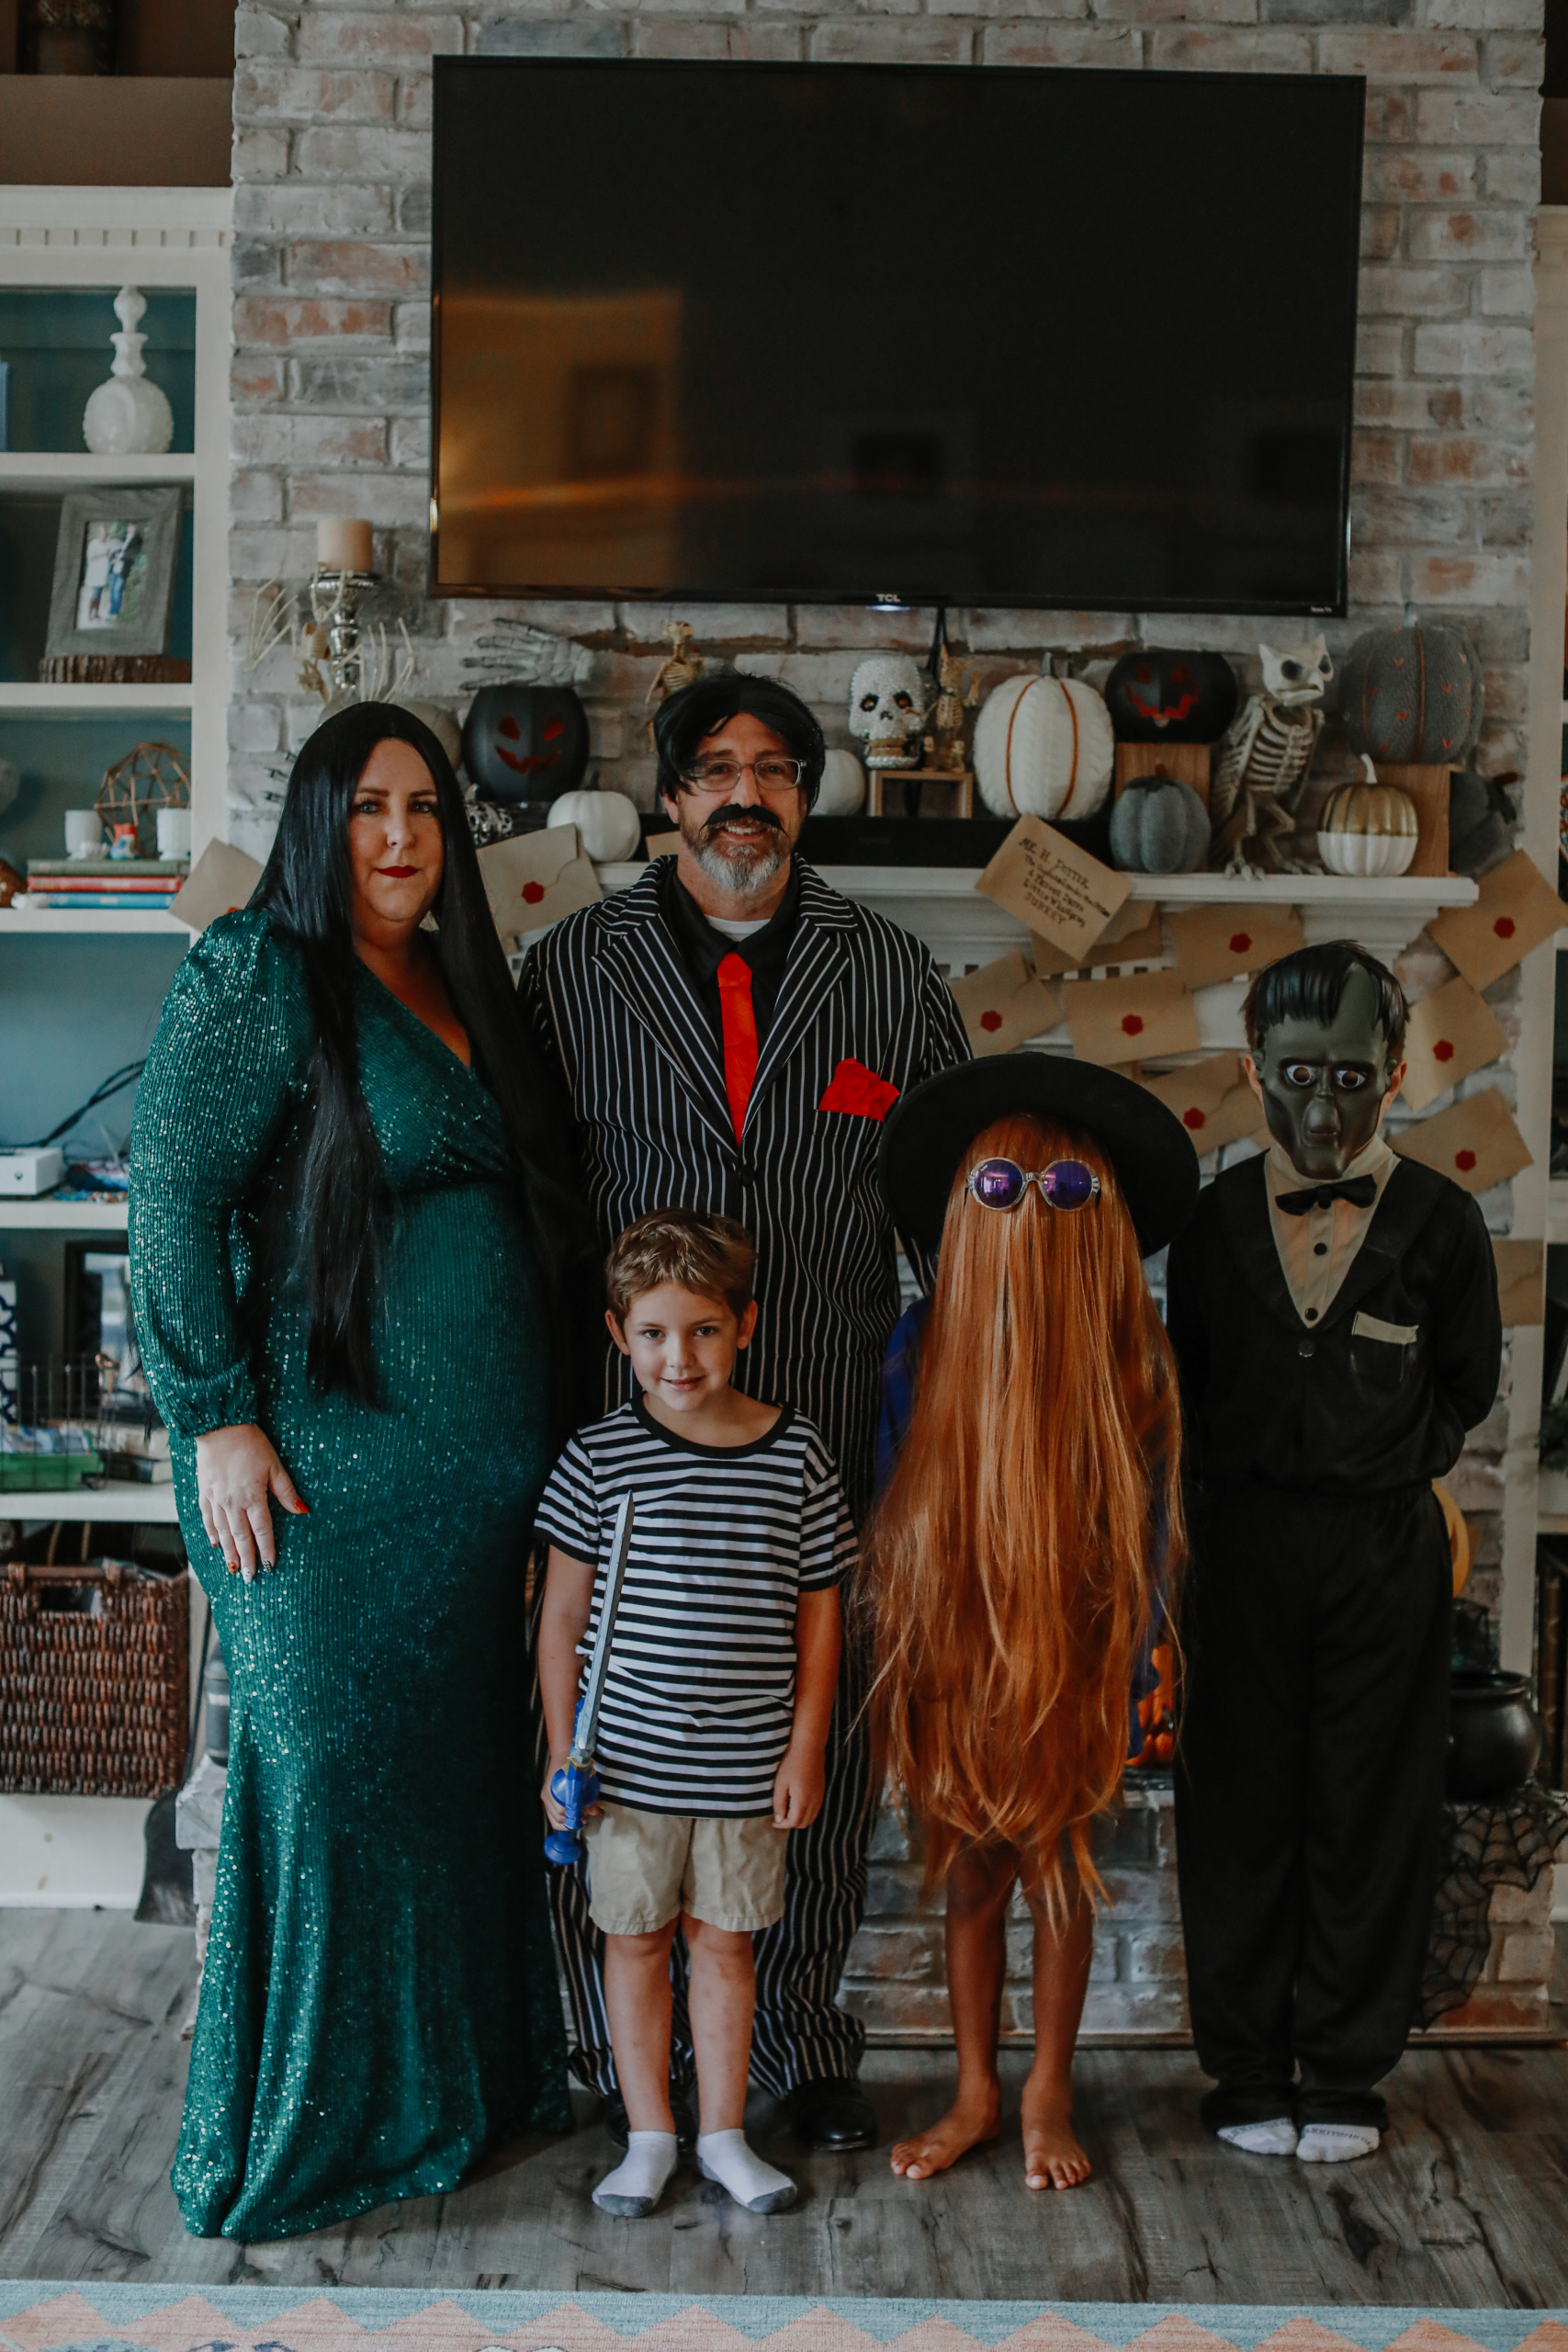 14 Family Halloween Costume Ideas: For Big-ish Families - We Five Kings